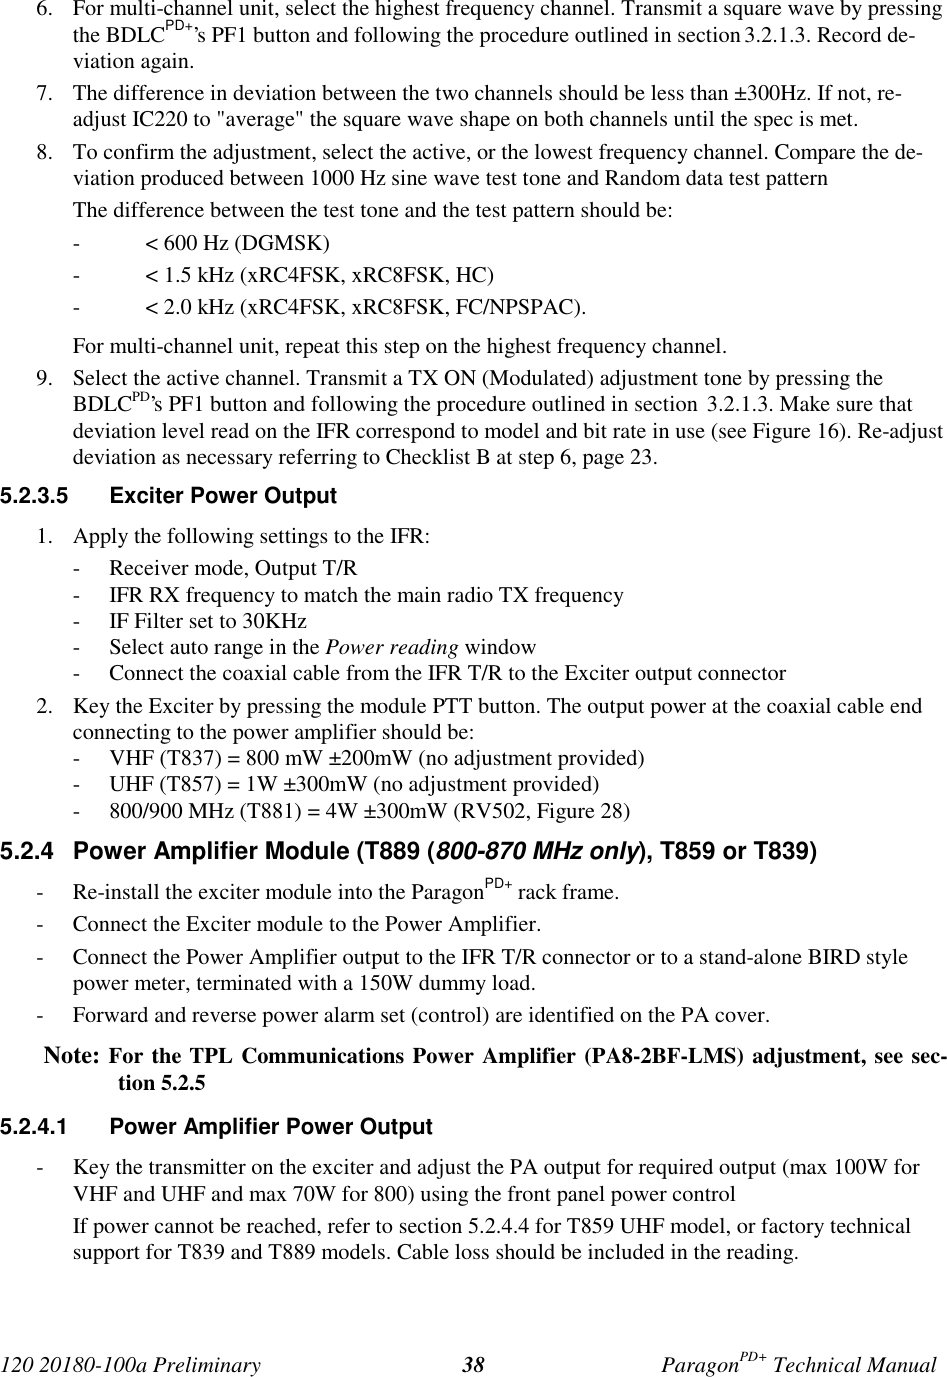 Page 45 of CalAmp Wireless Networks BDD4T881-3 ParagonPD User Manual Parg PD  T100a Prelim